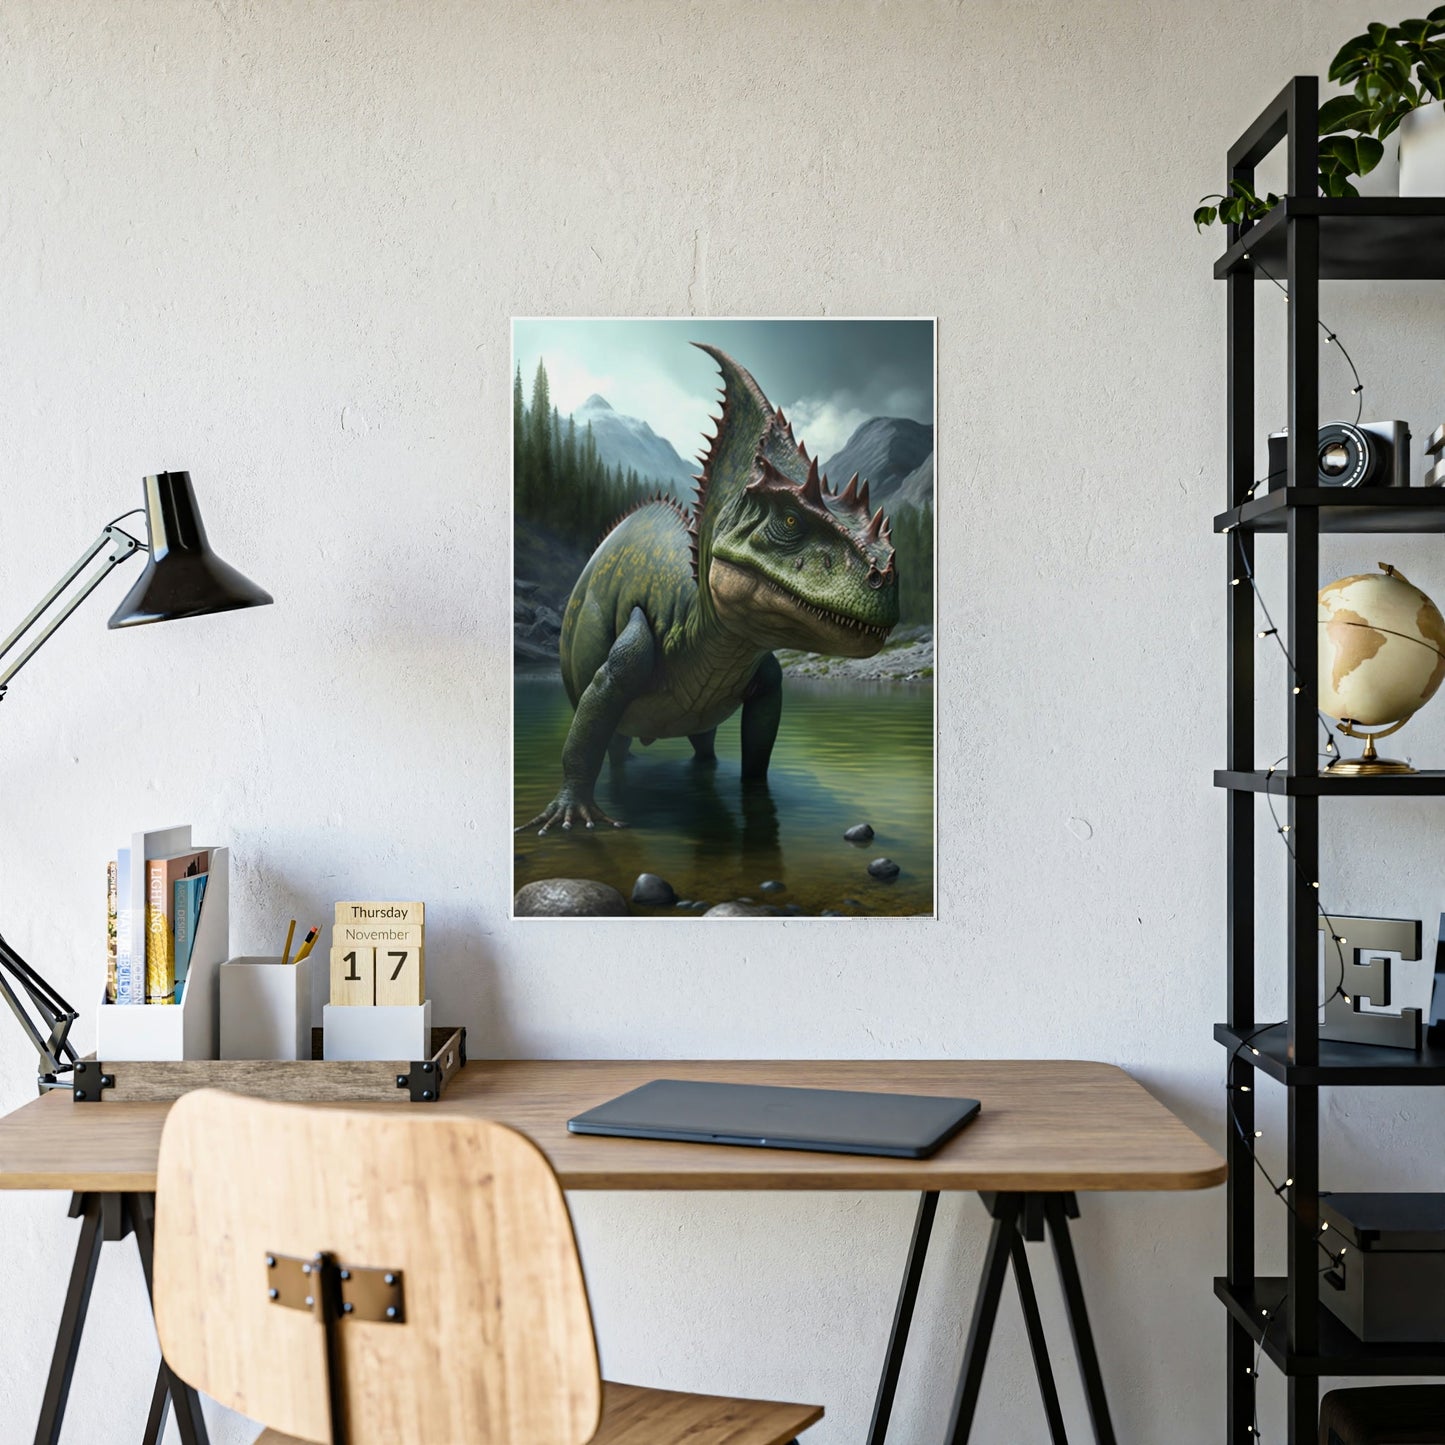 Jurassic Dreams: Canvas & Poster of Dinosaurs and Imagination